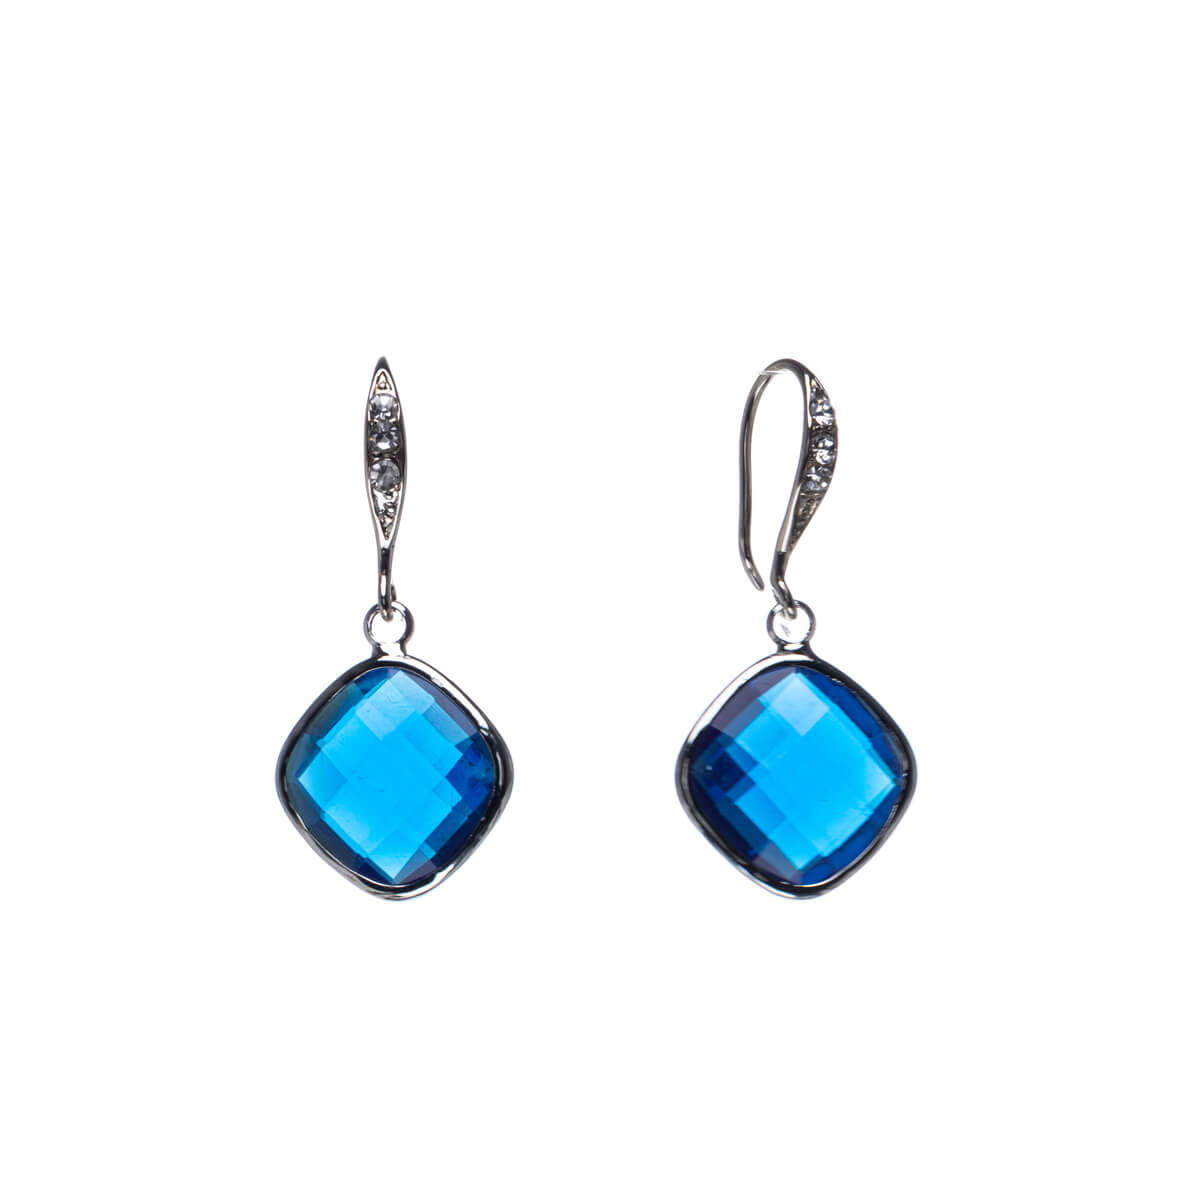 Sparkling hanging square earrings